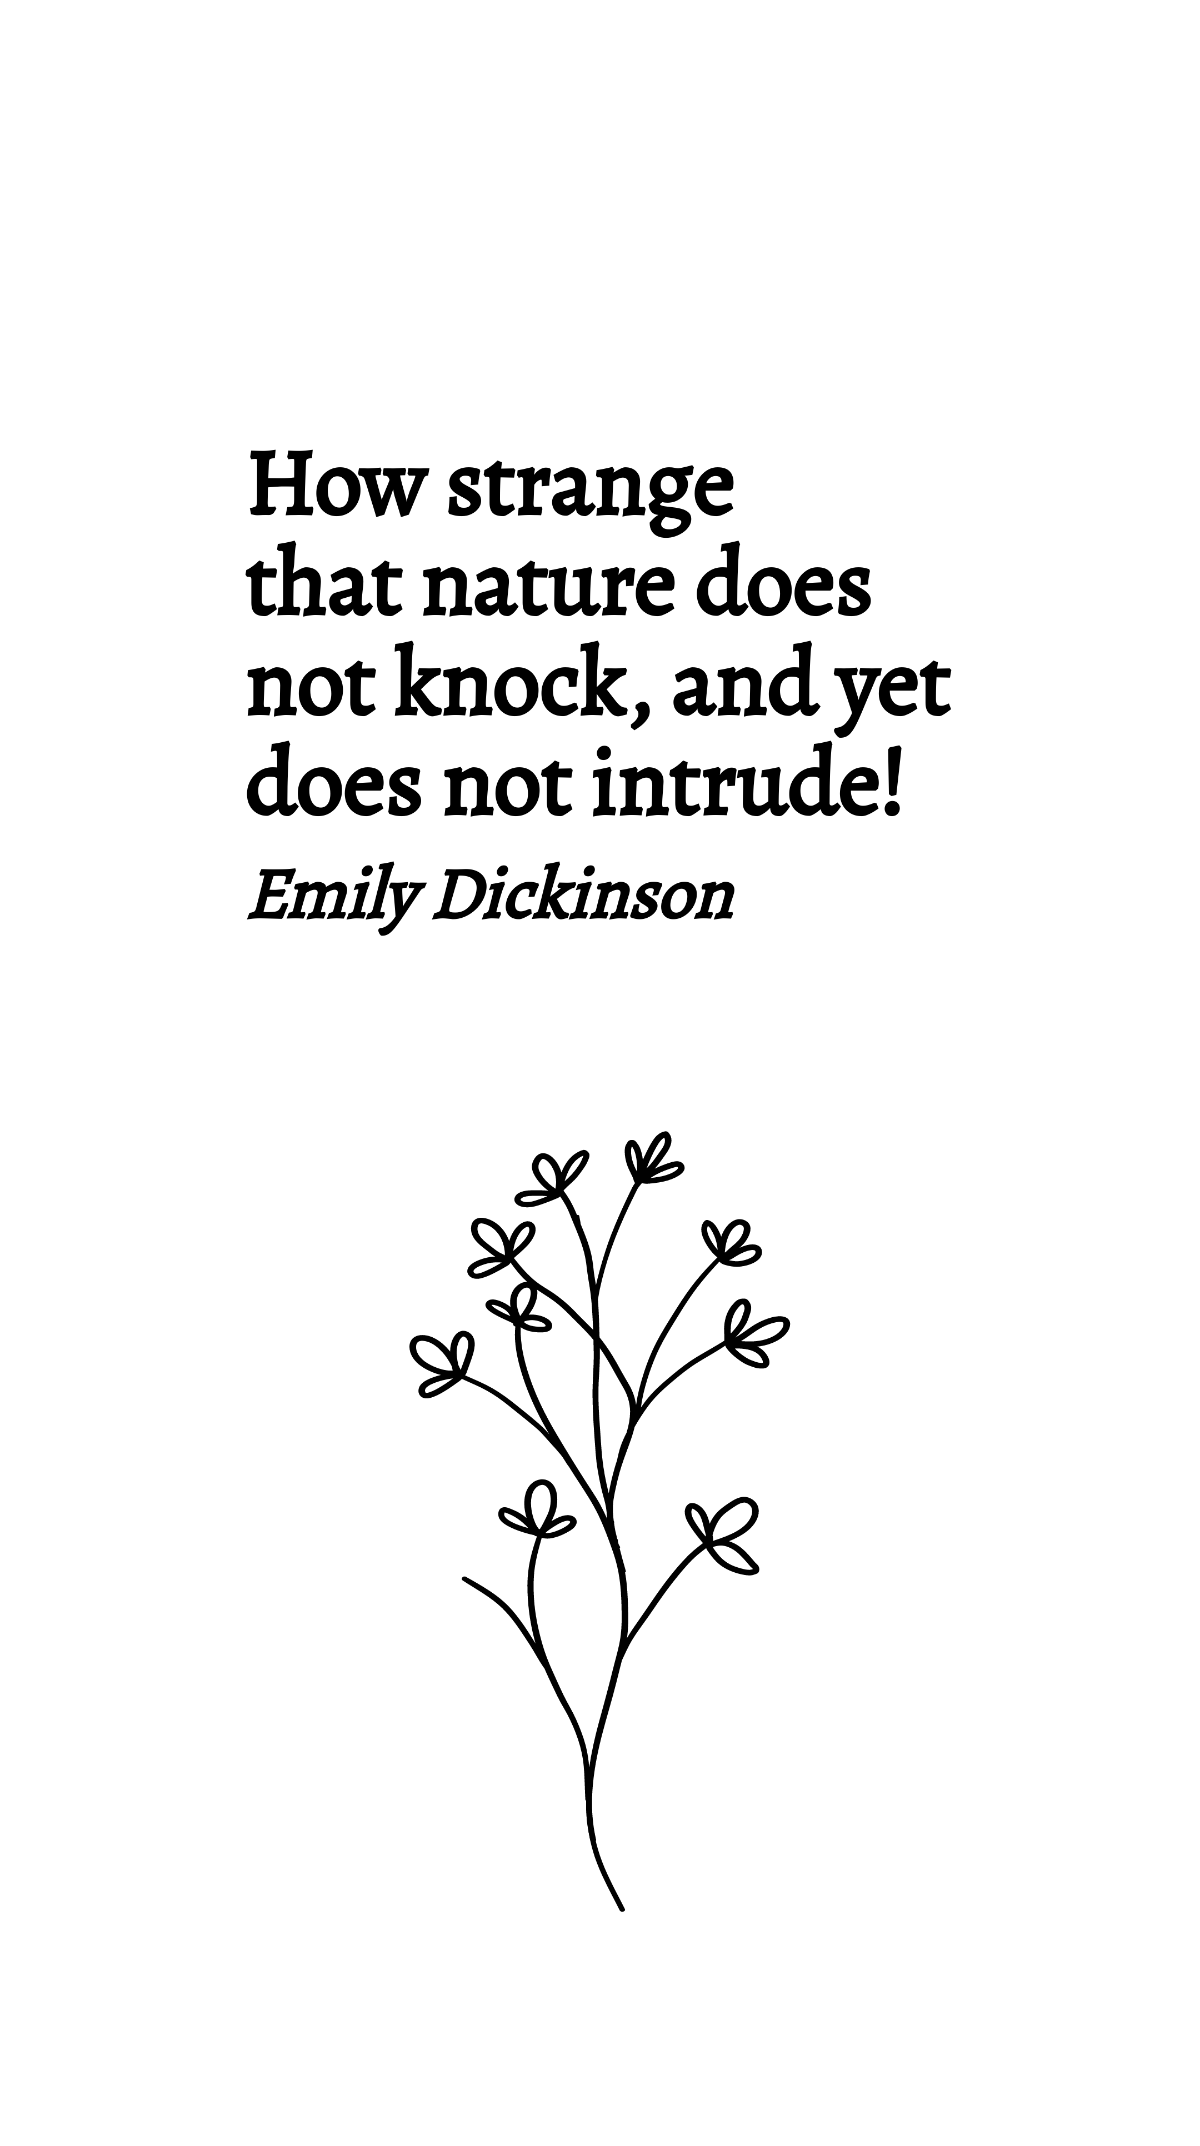 Emily Dickinson - How strange that nature does not knock, and yet does not intrude!